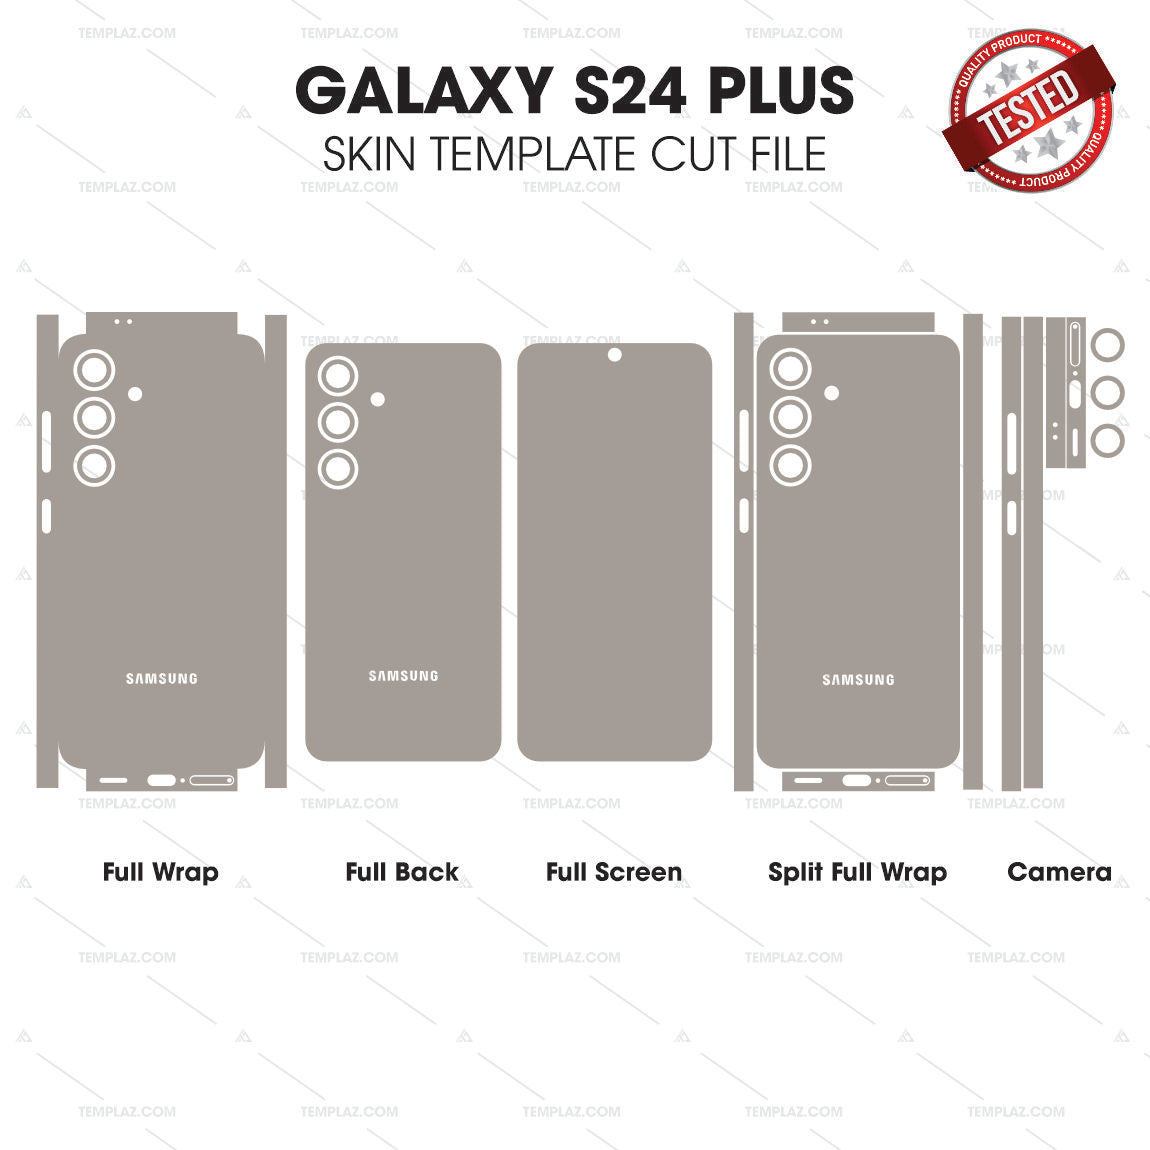 Samsung Galaxy S24 Plus skin template vector download